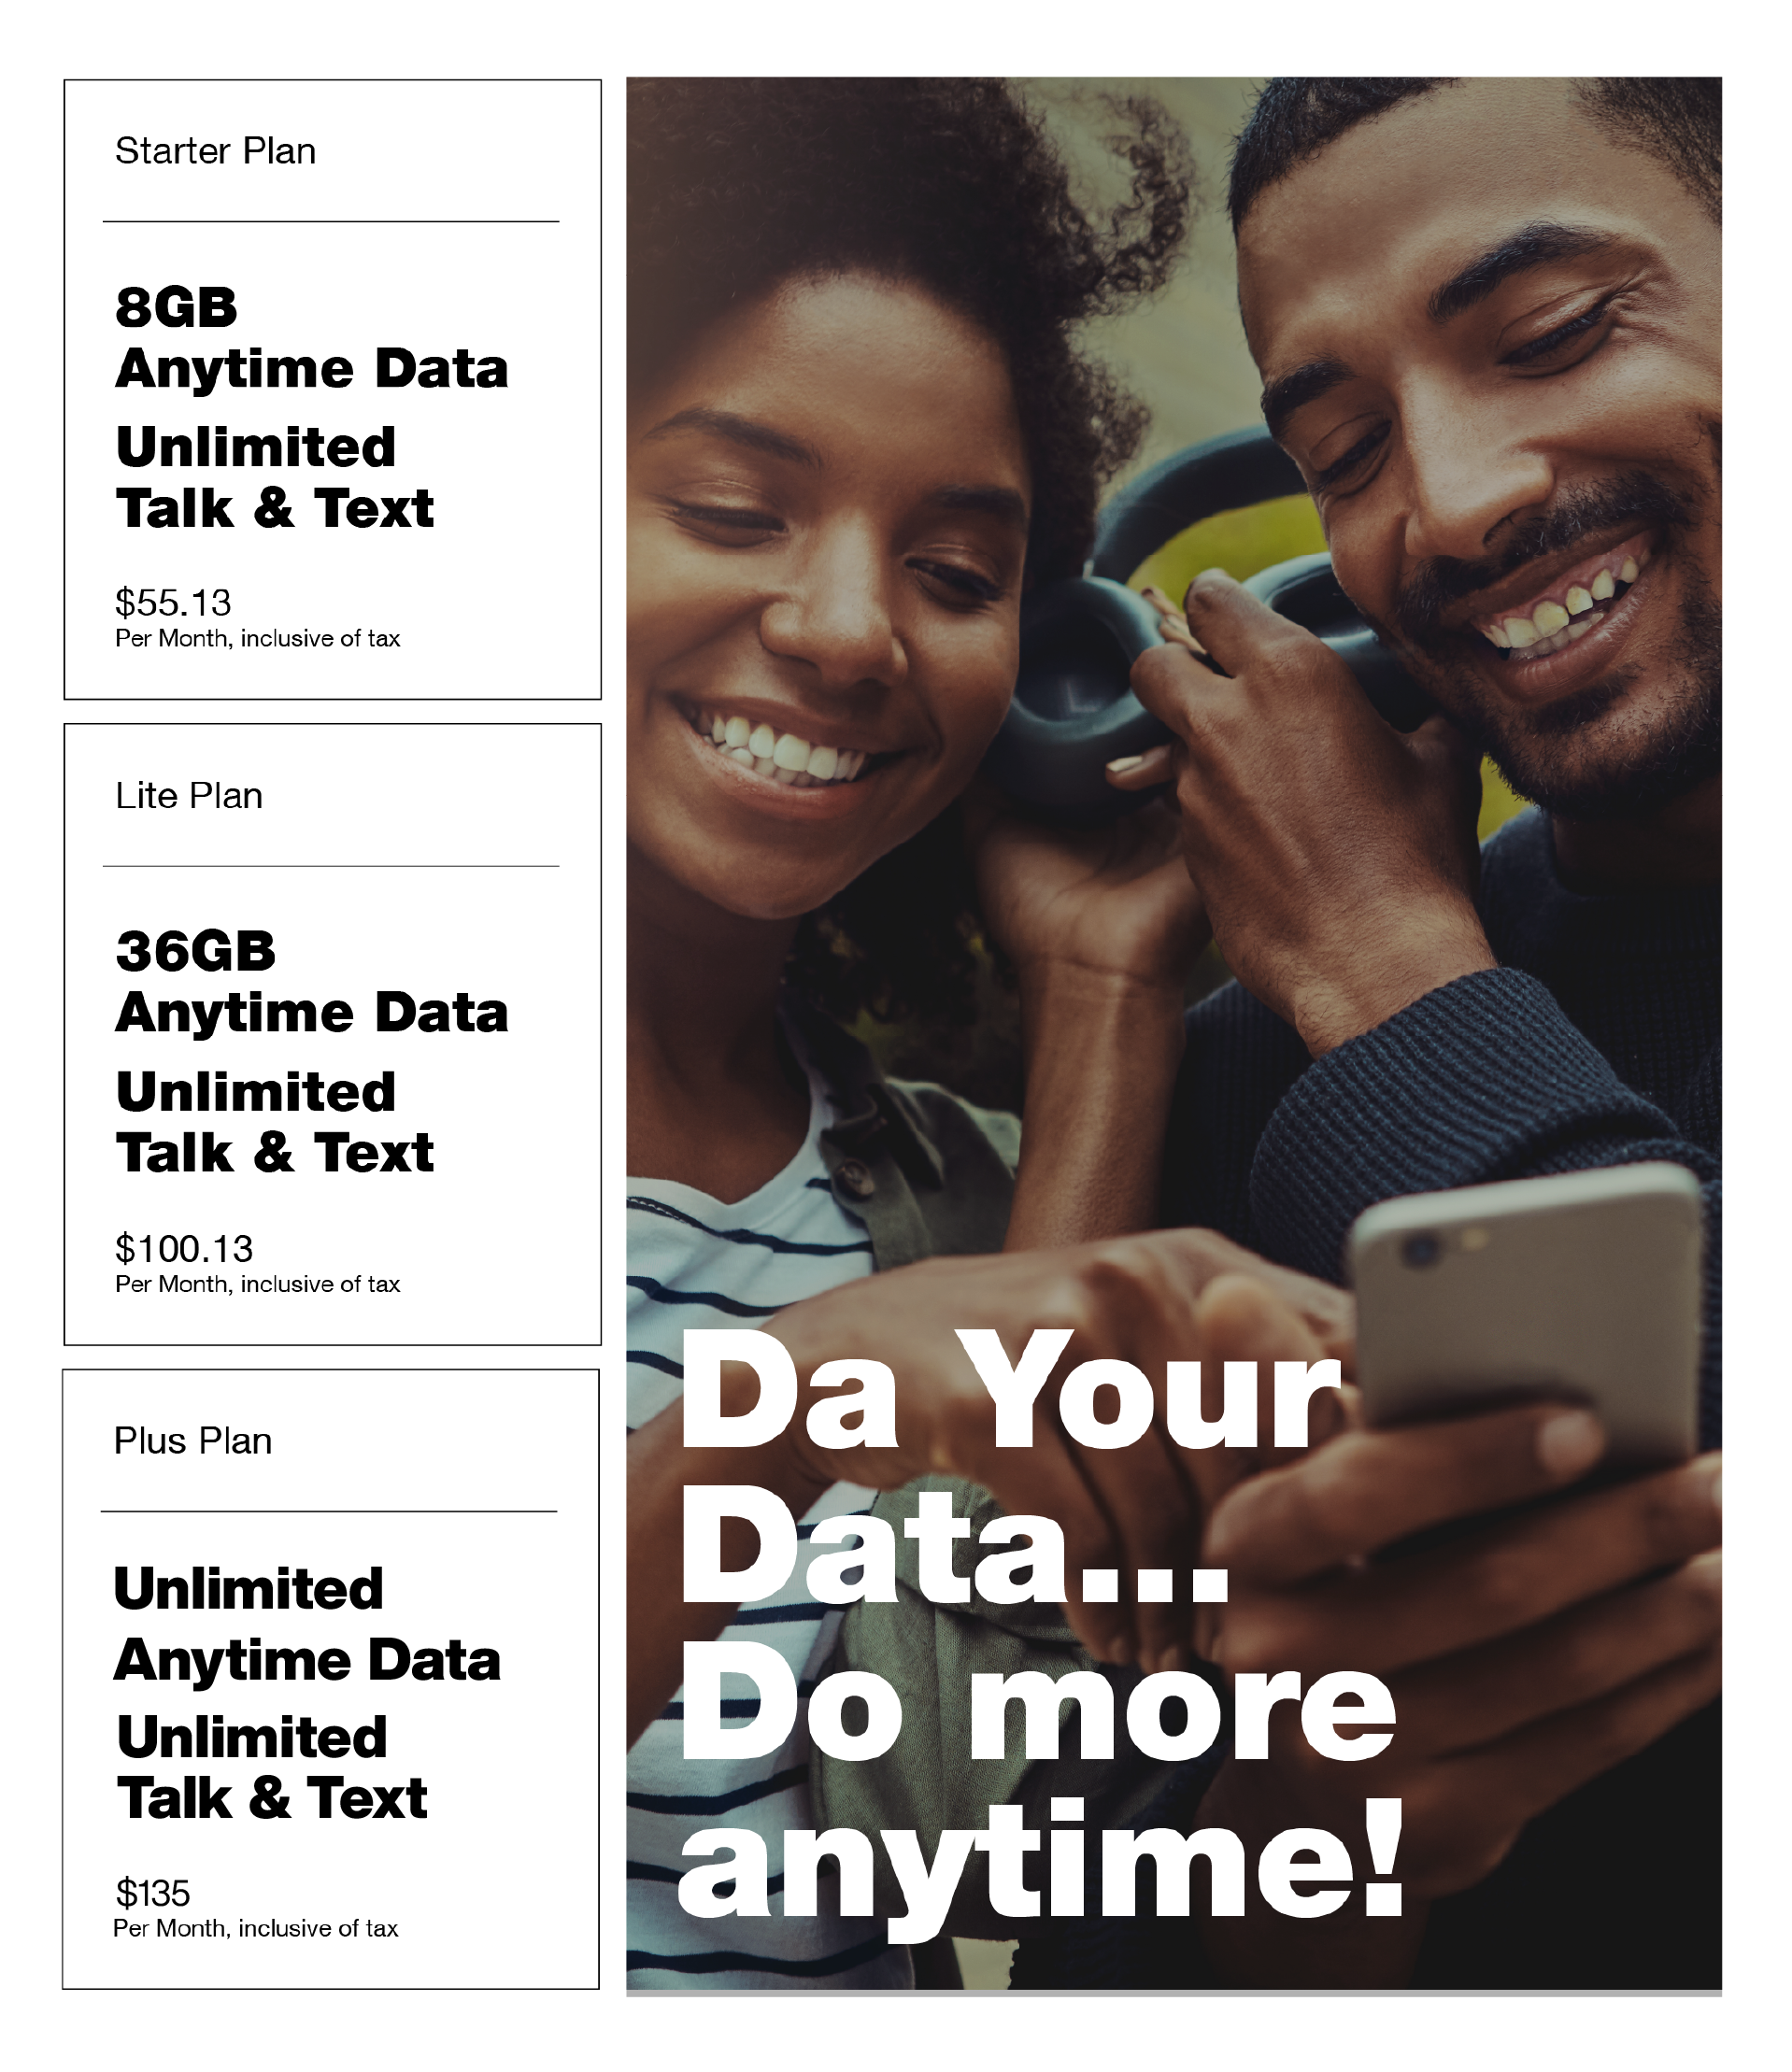 Unlimited Anytime Data